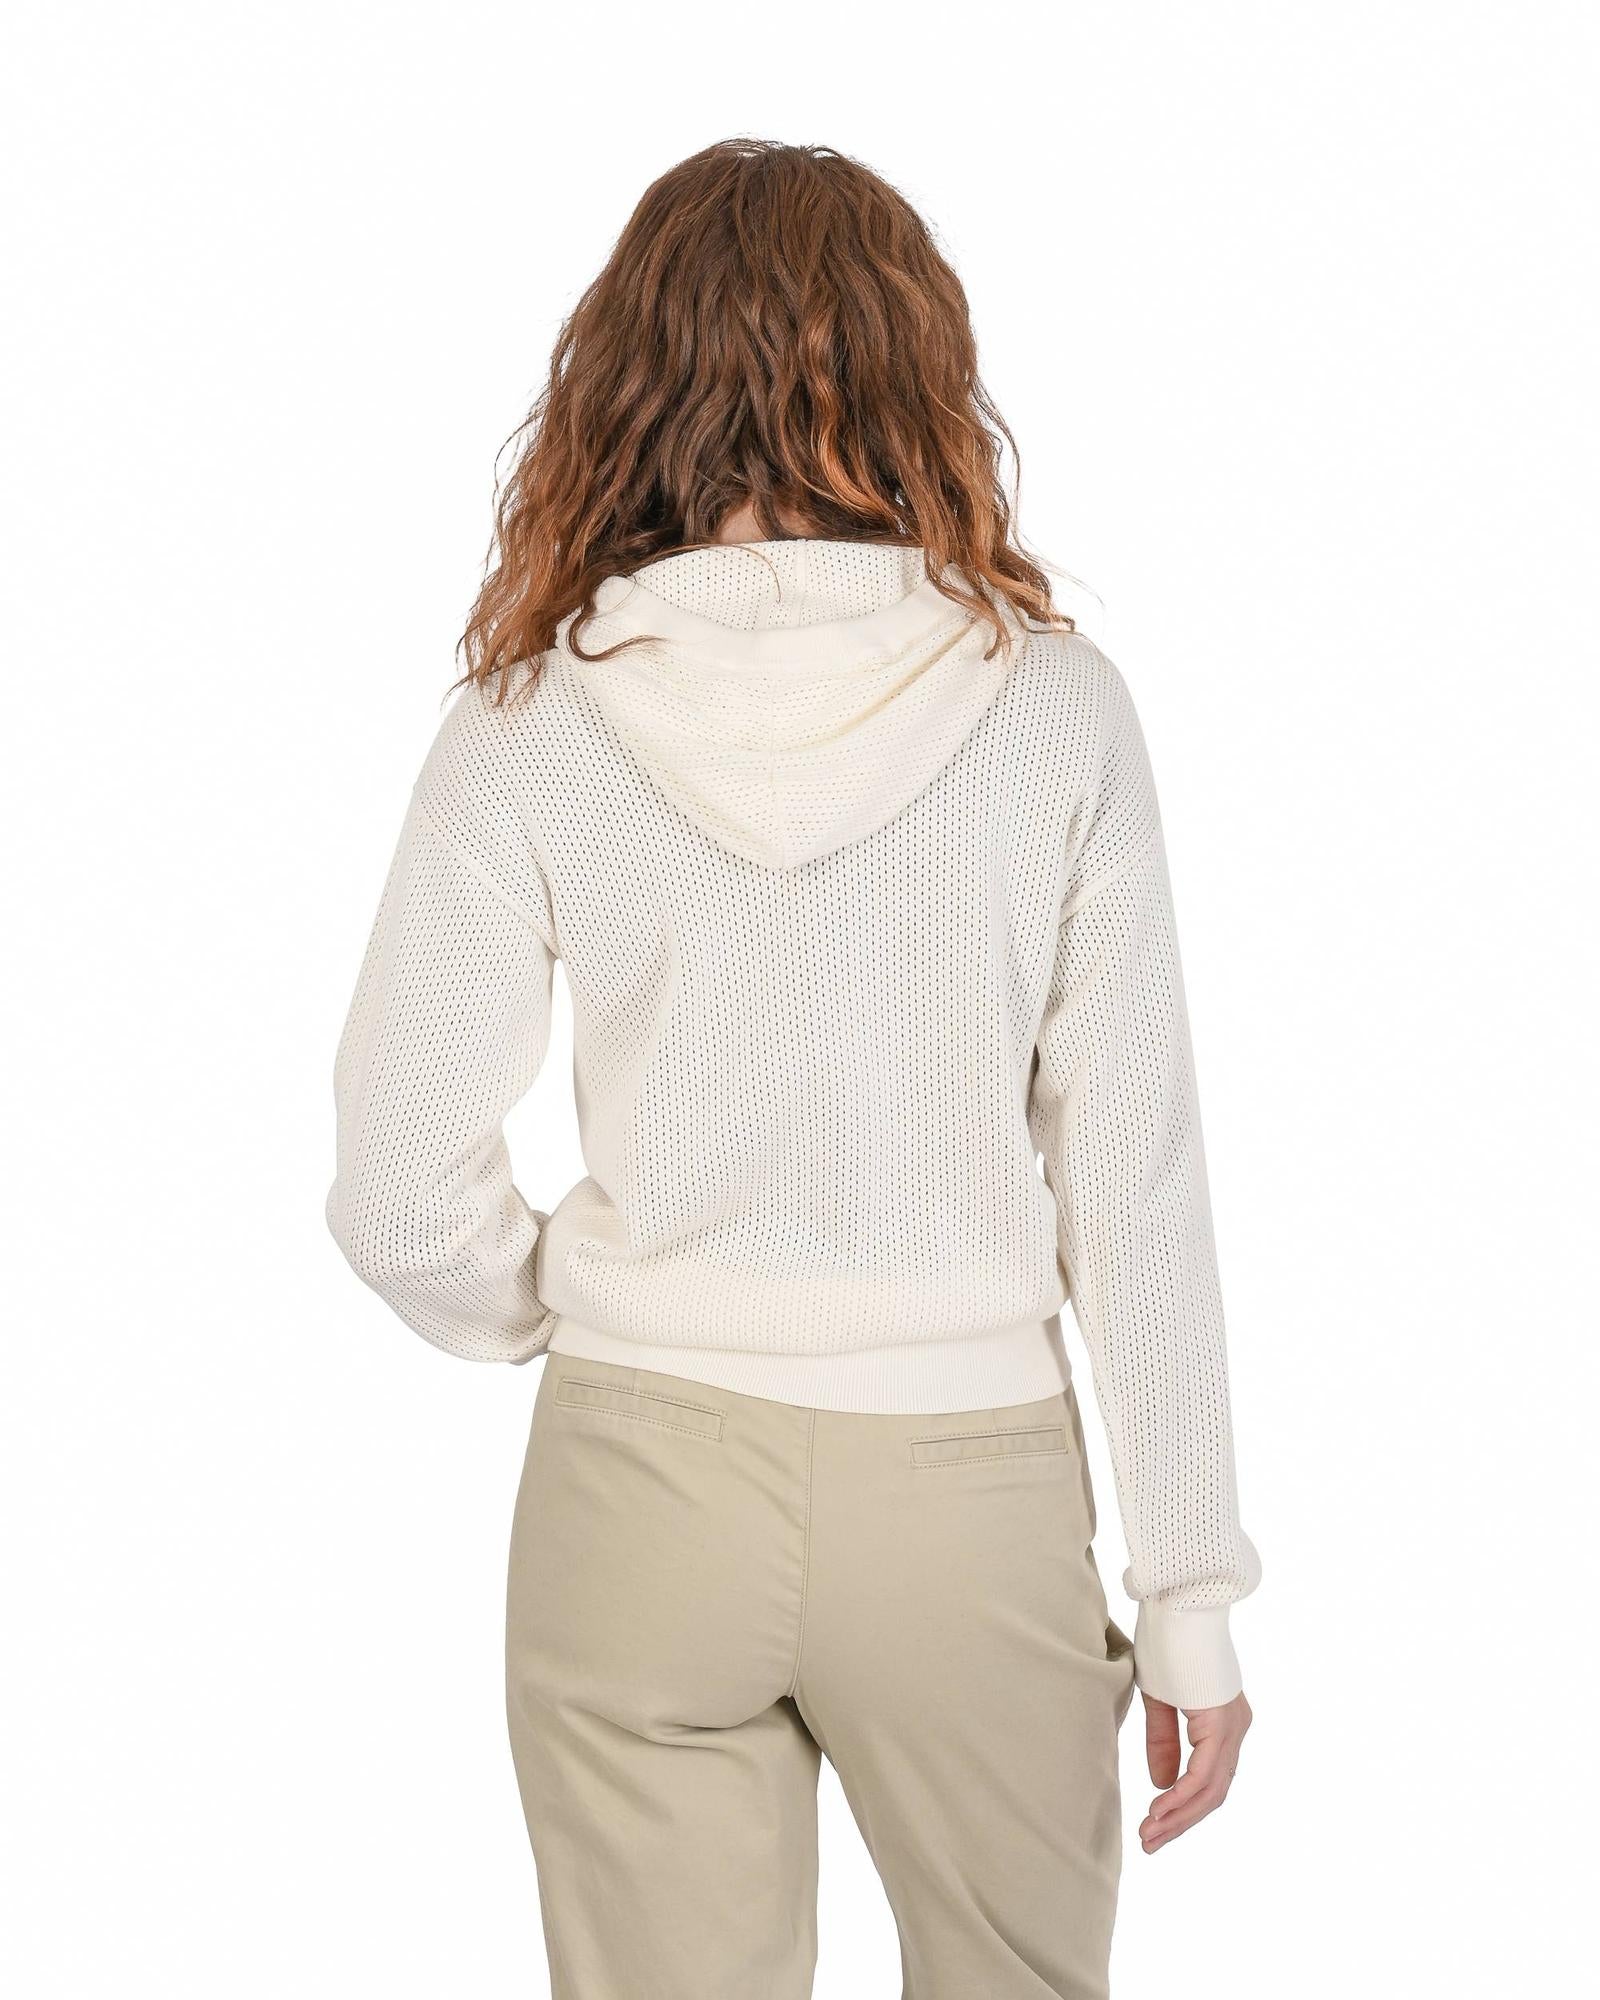 Women's Cotton and Silk Womens Sweater in White - S